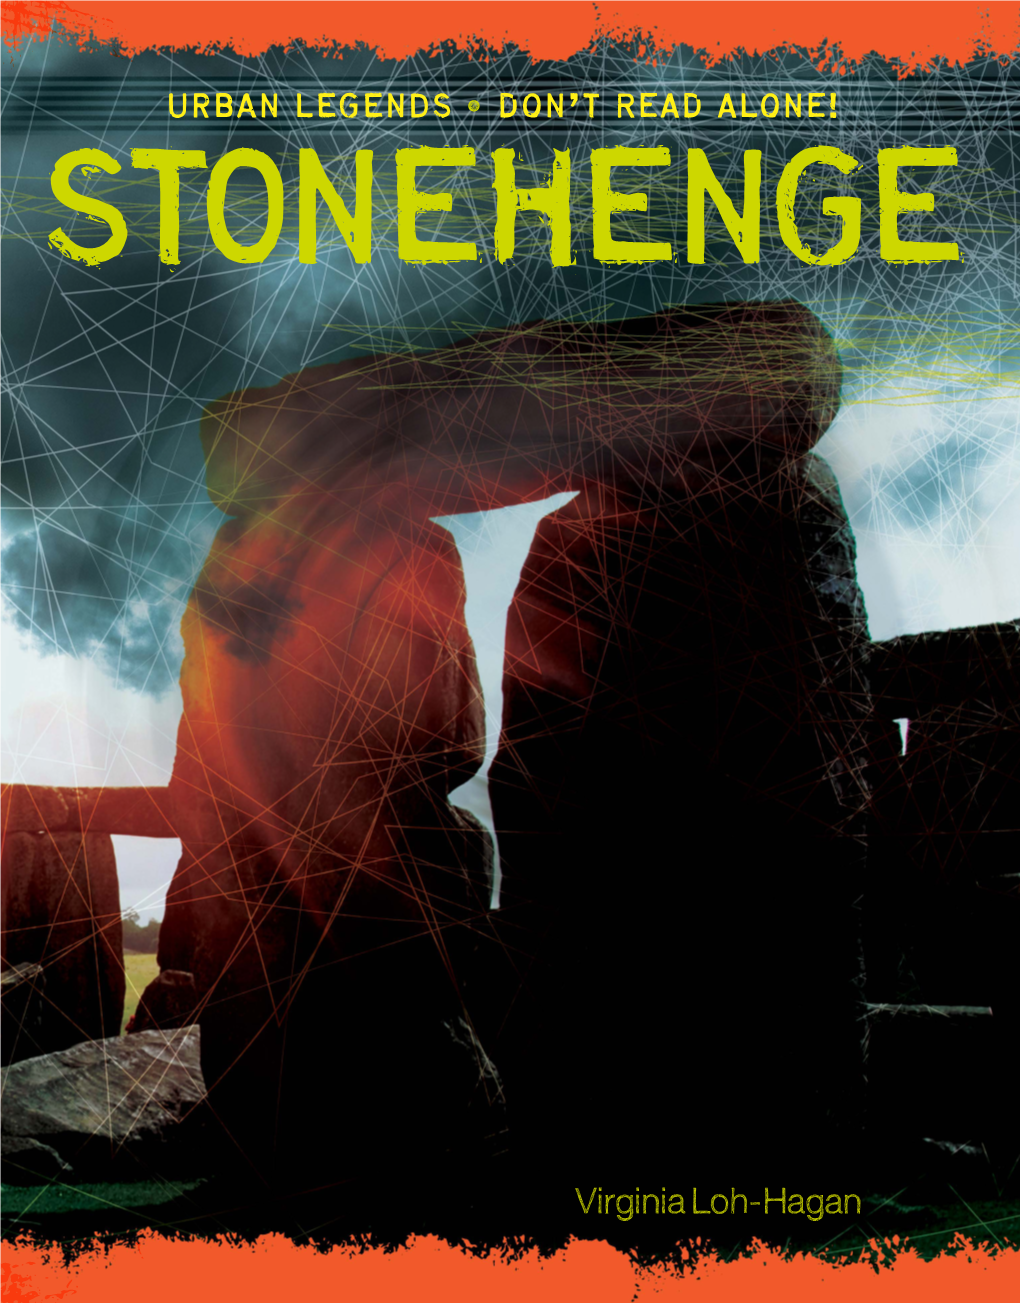 Legends • DON’T READ ALONE! Urban LEGEND (UR-Buhn LEJ-Uhnd) an Often Horrific Story That Is Based Stonehenge on Hearsay and Circulated As True, a Modern Folktale